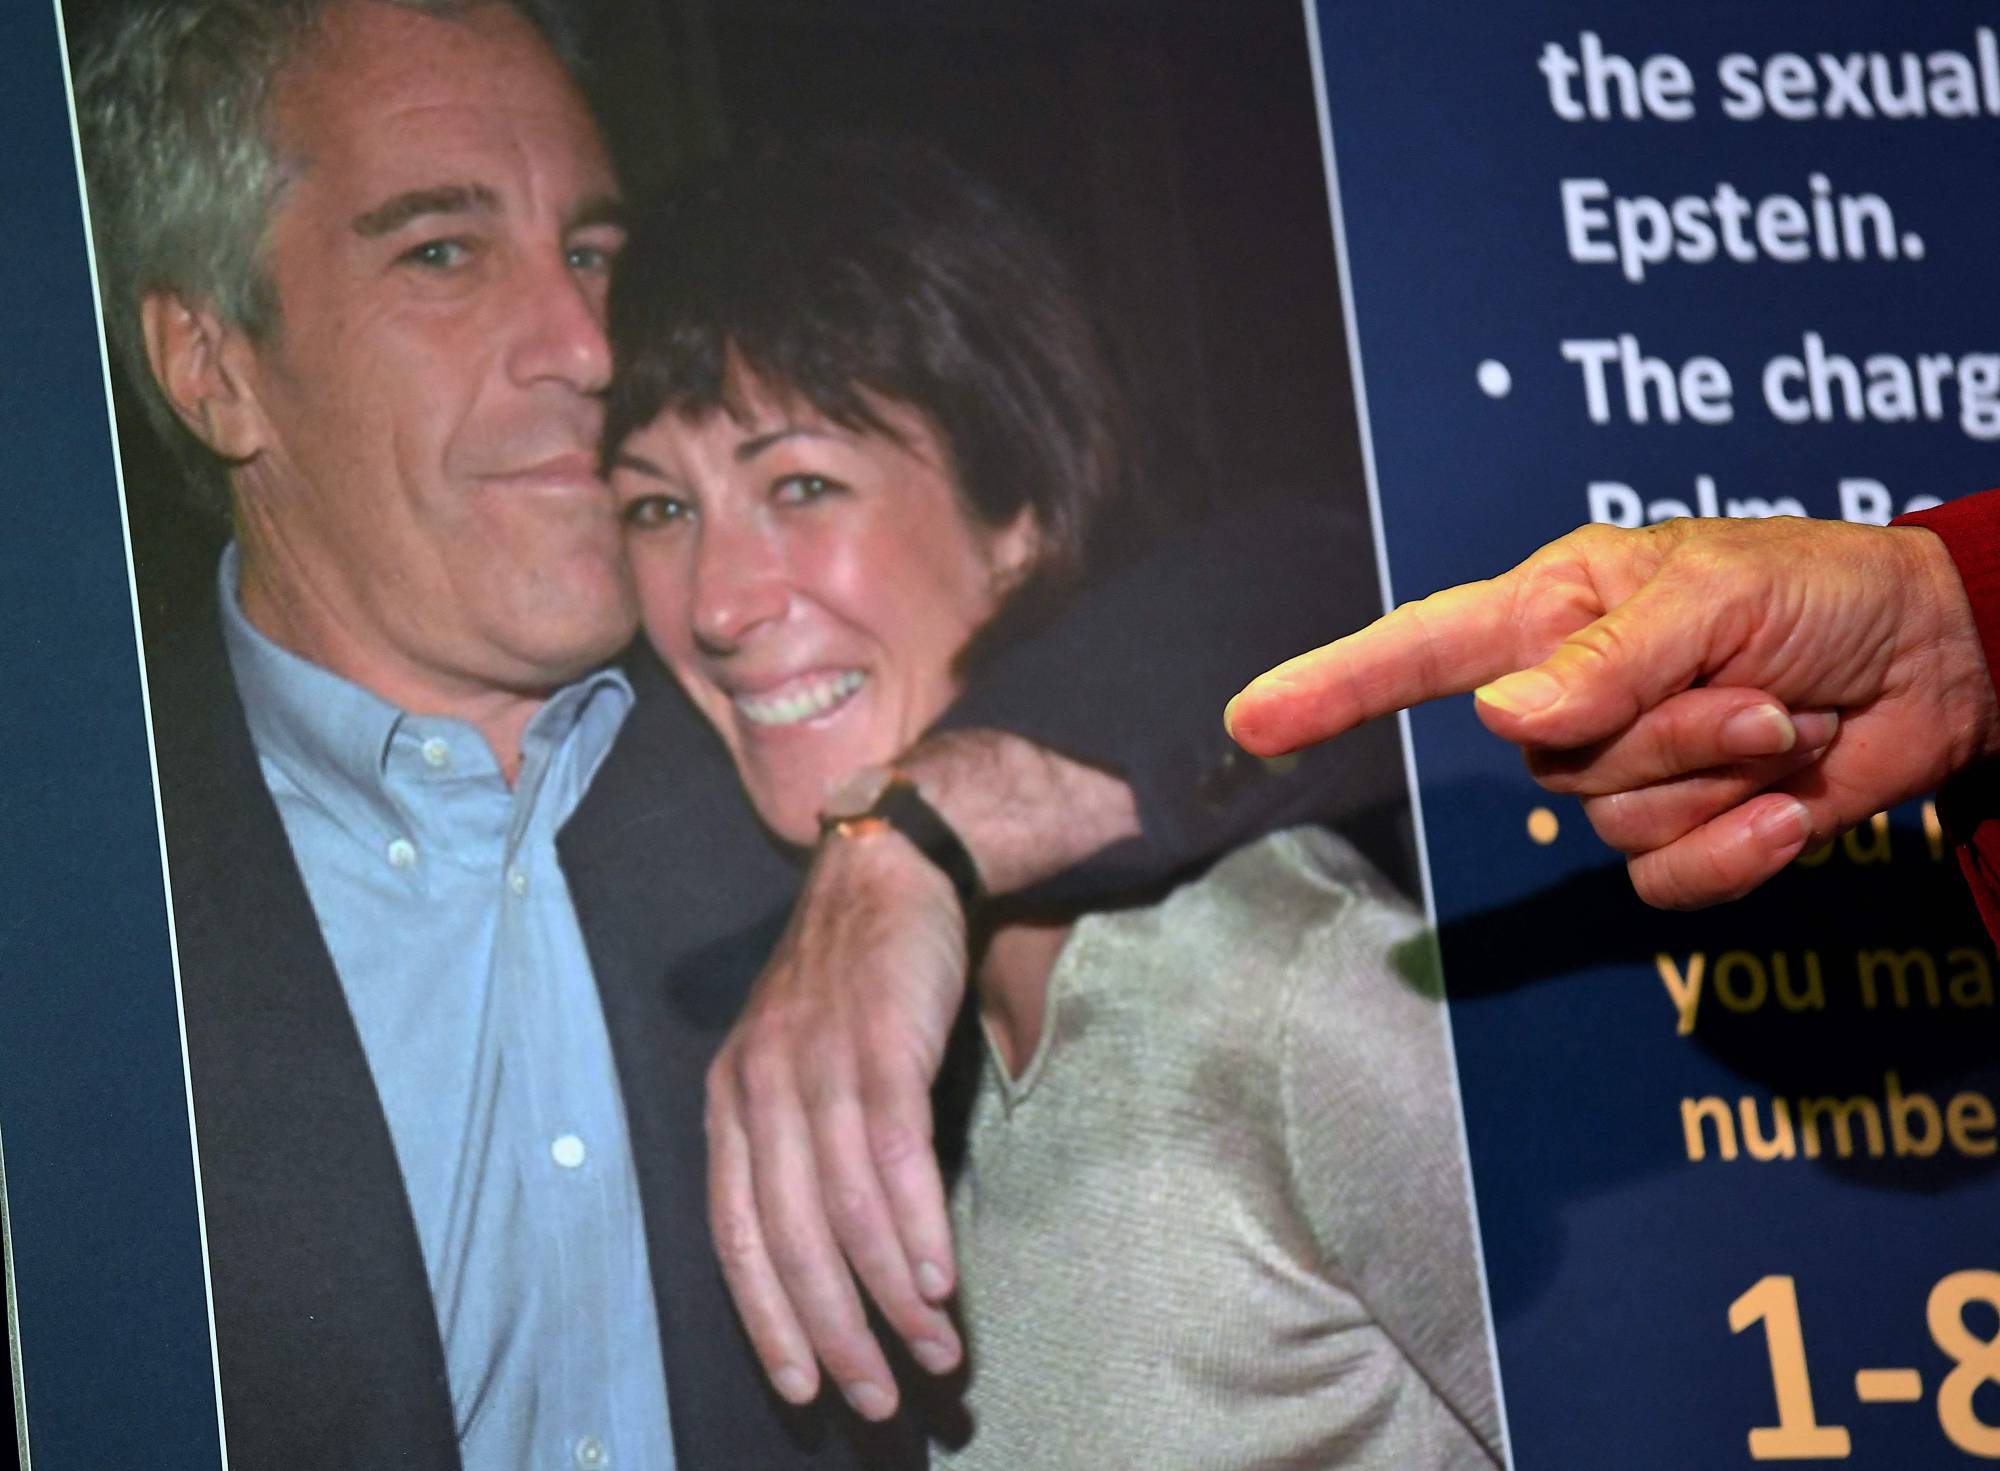 Ghislaine Maxwell convicted for helping Jeffrey Epstein sexually abuse teens